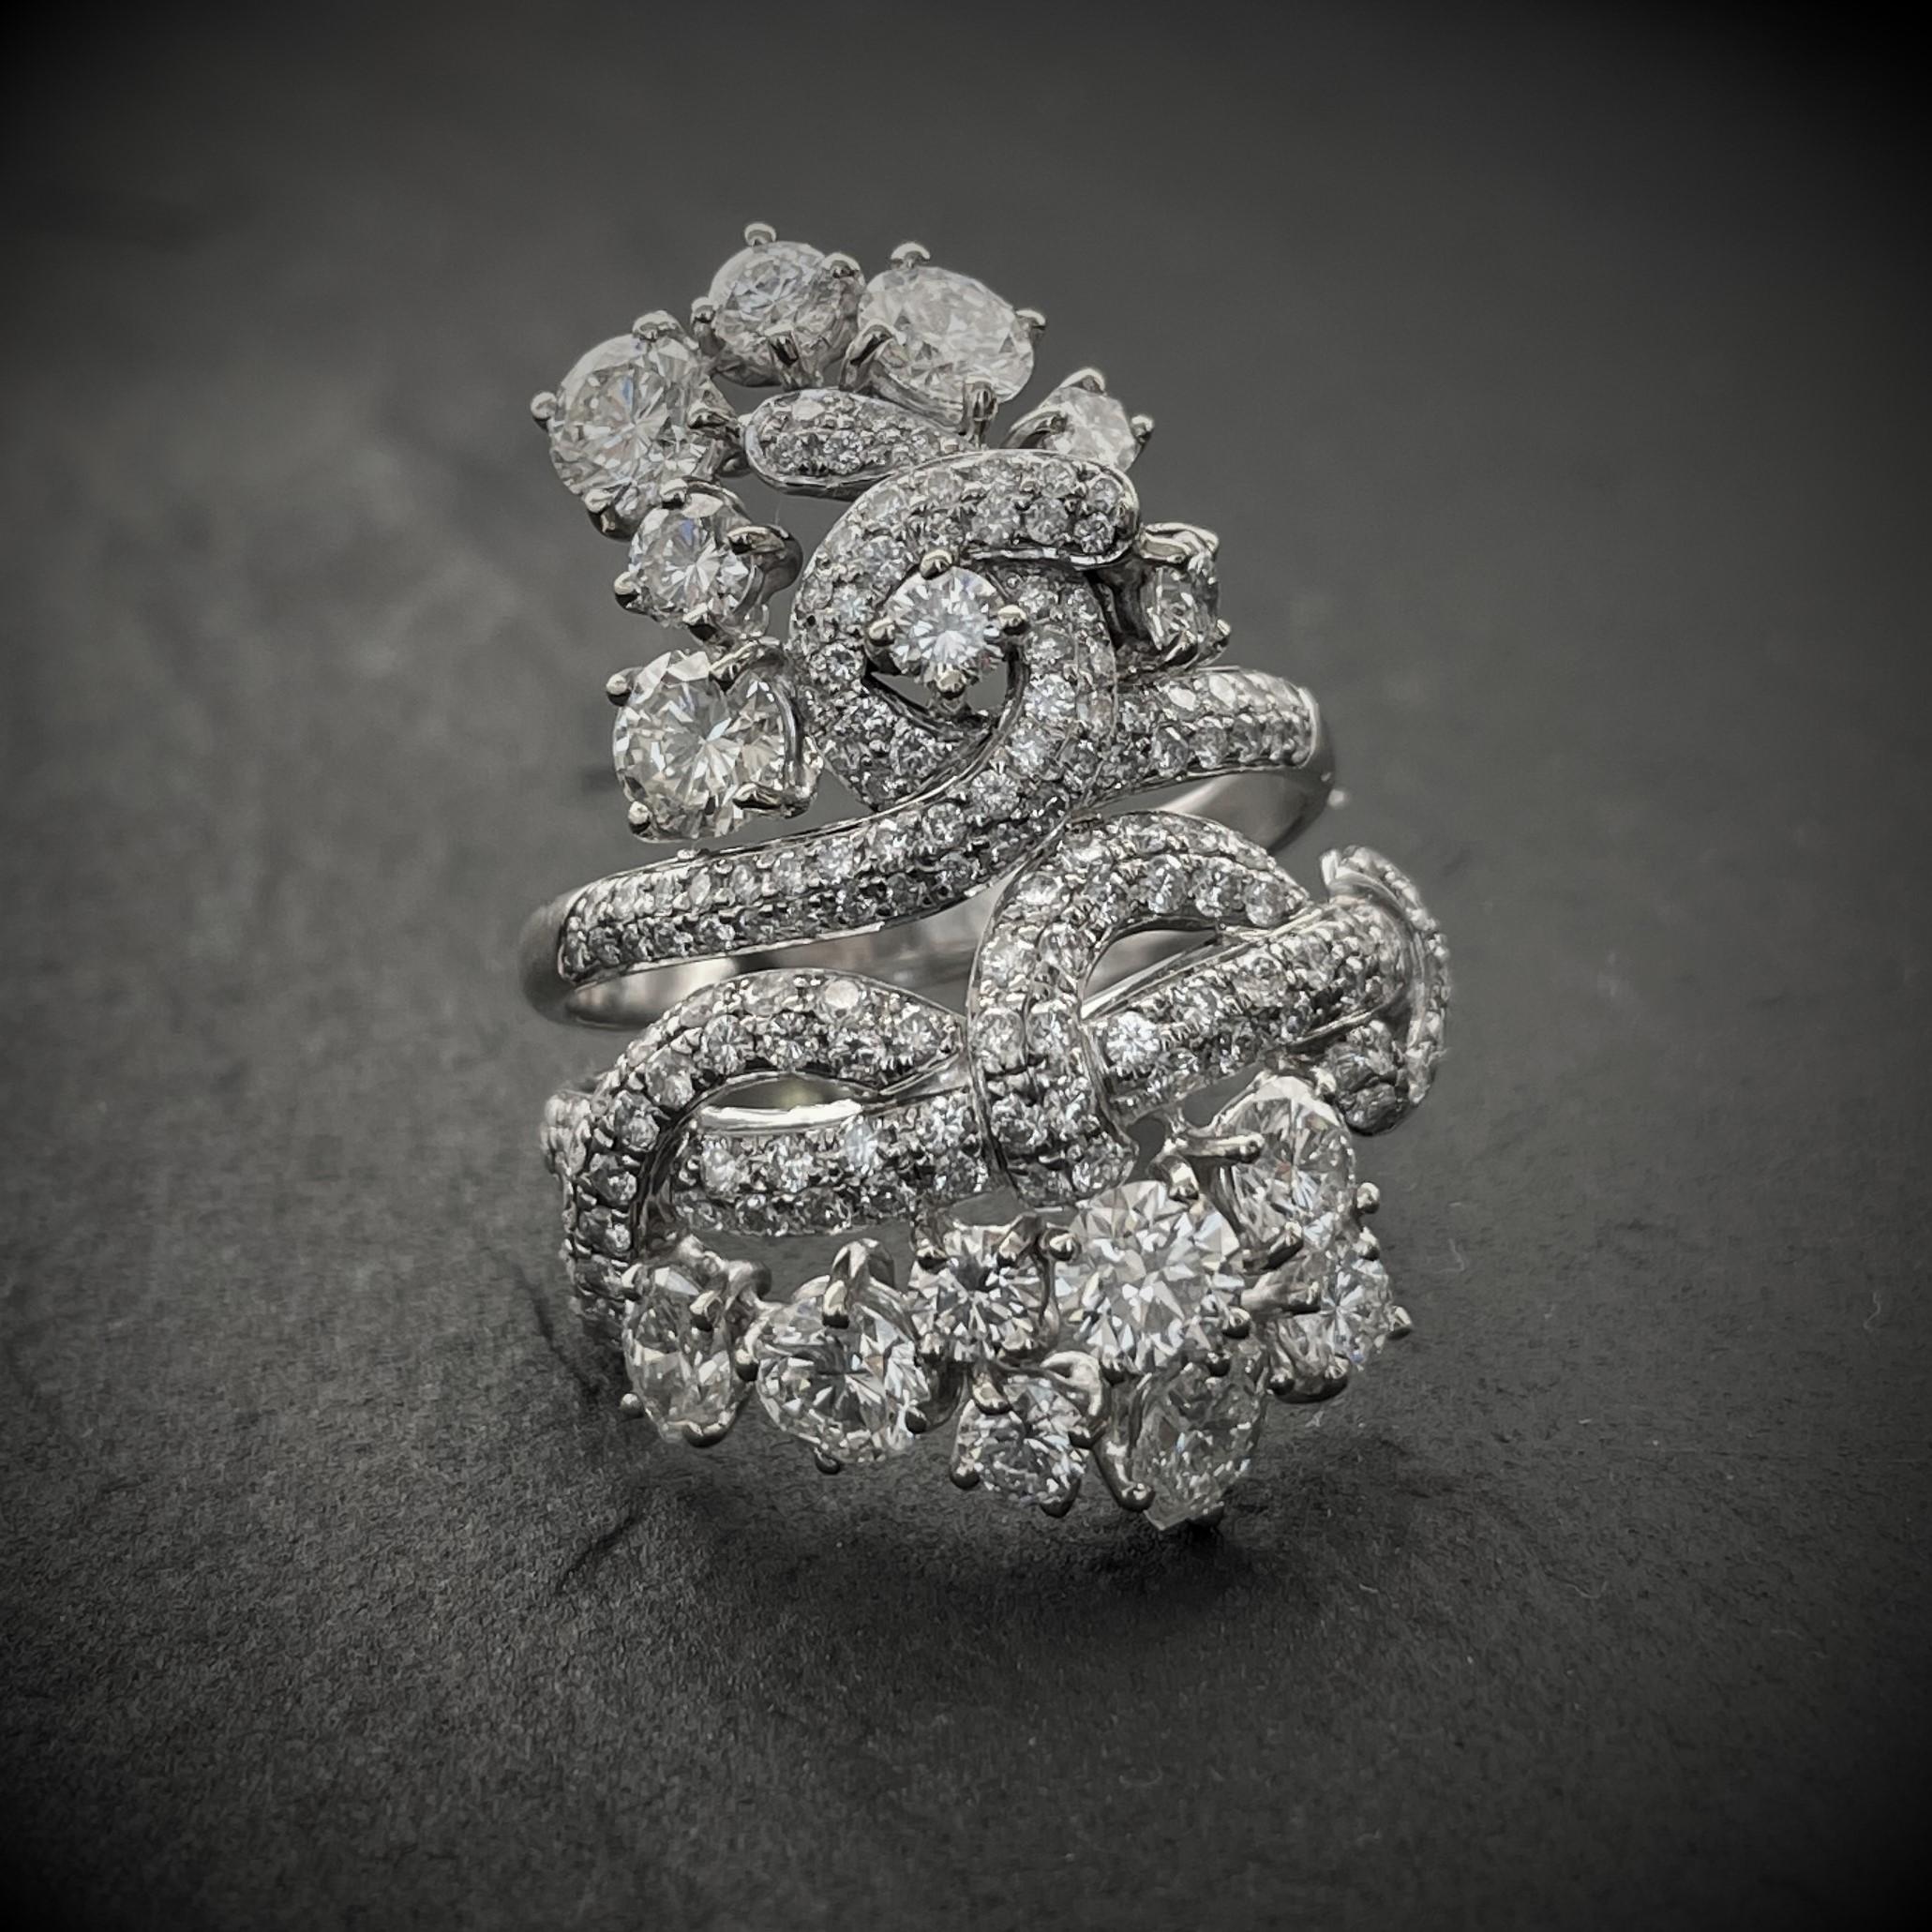 Contemporary Rosior one-off Round Cut Diamond Cocktail Ring set in White Gold and Platinum 